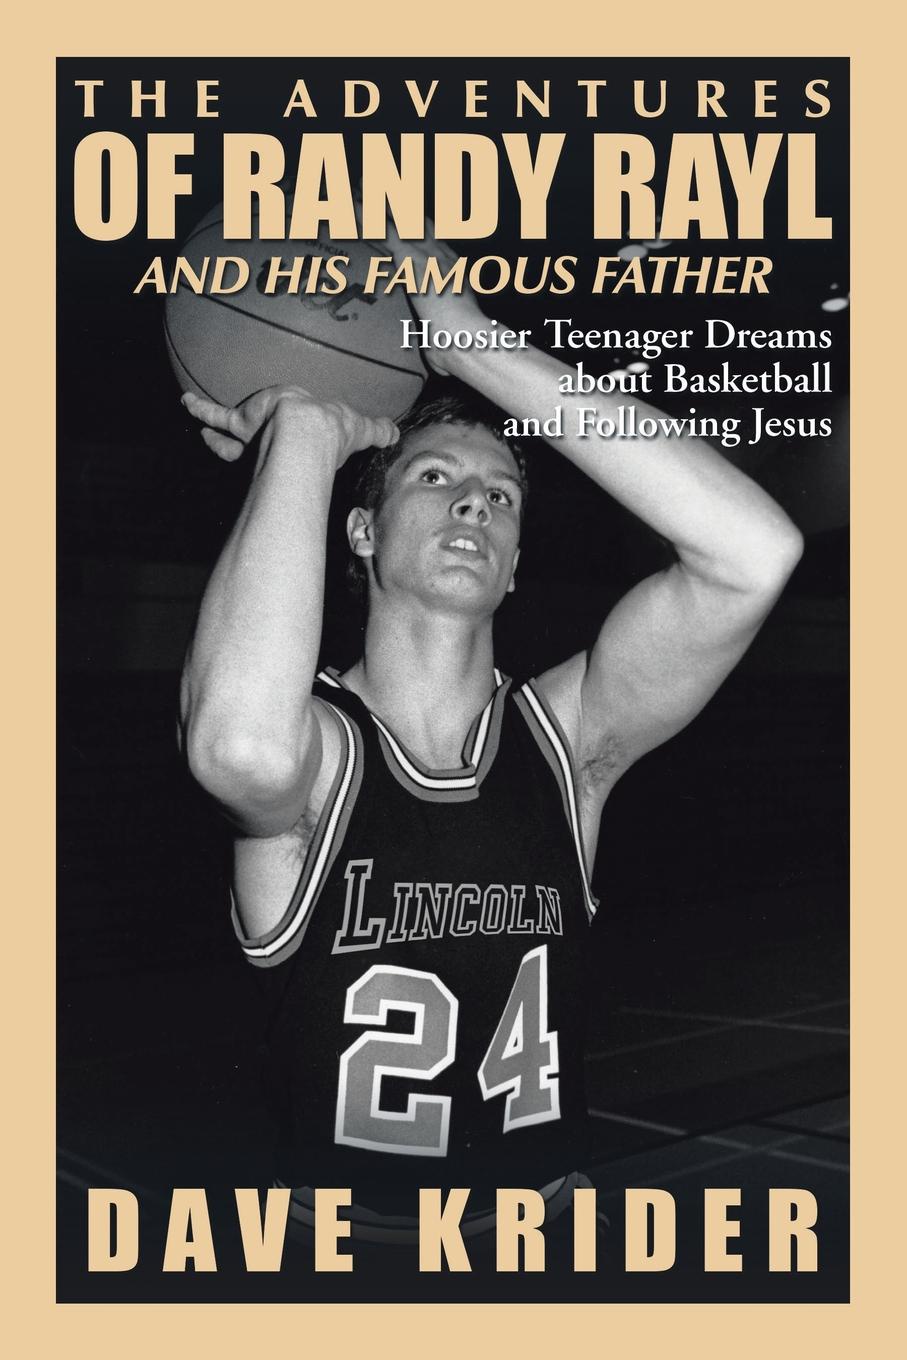 The Adventures of Randy Rayl and His Famous Father. Hoosier Teenager Dreams about Basketball and Following Jesus